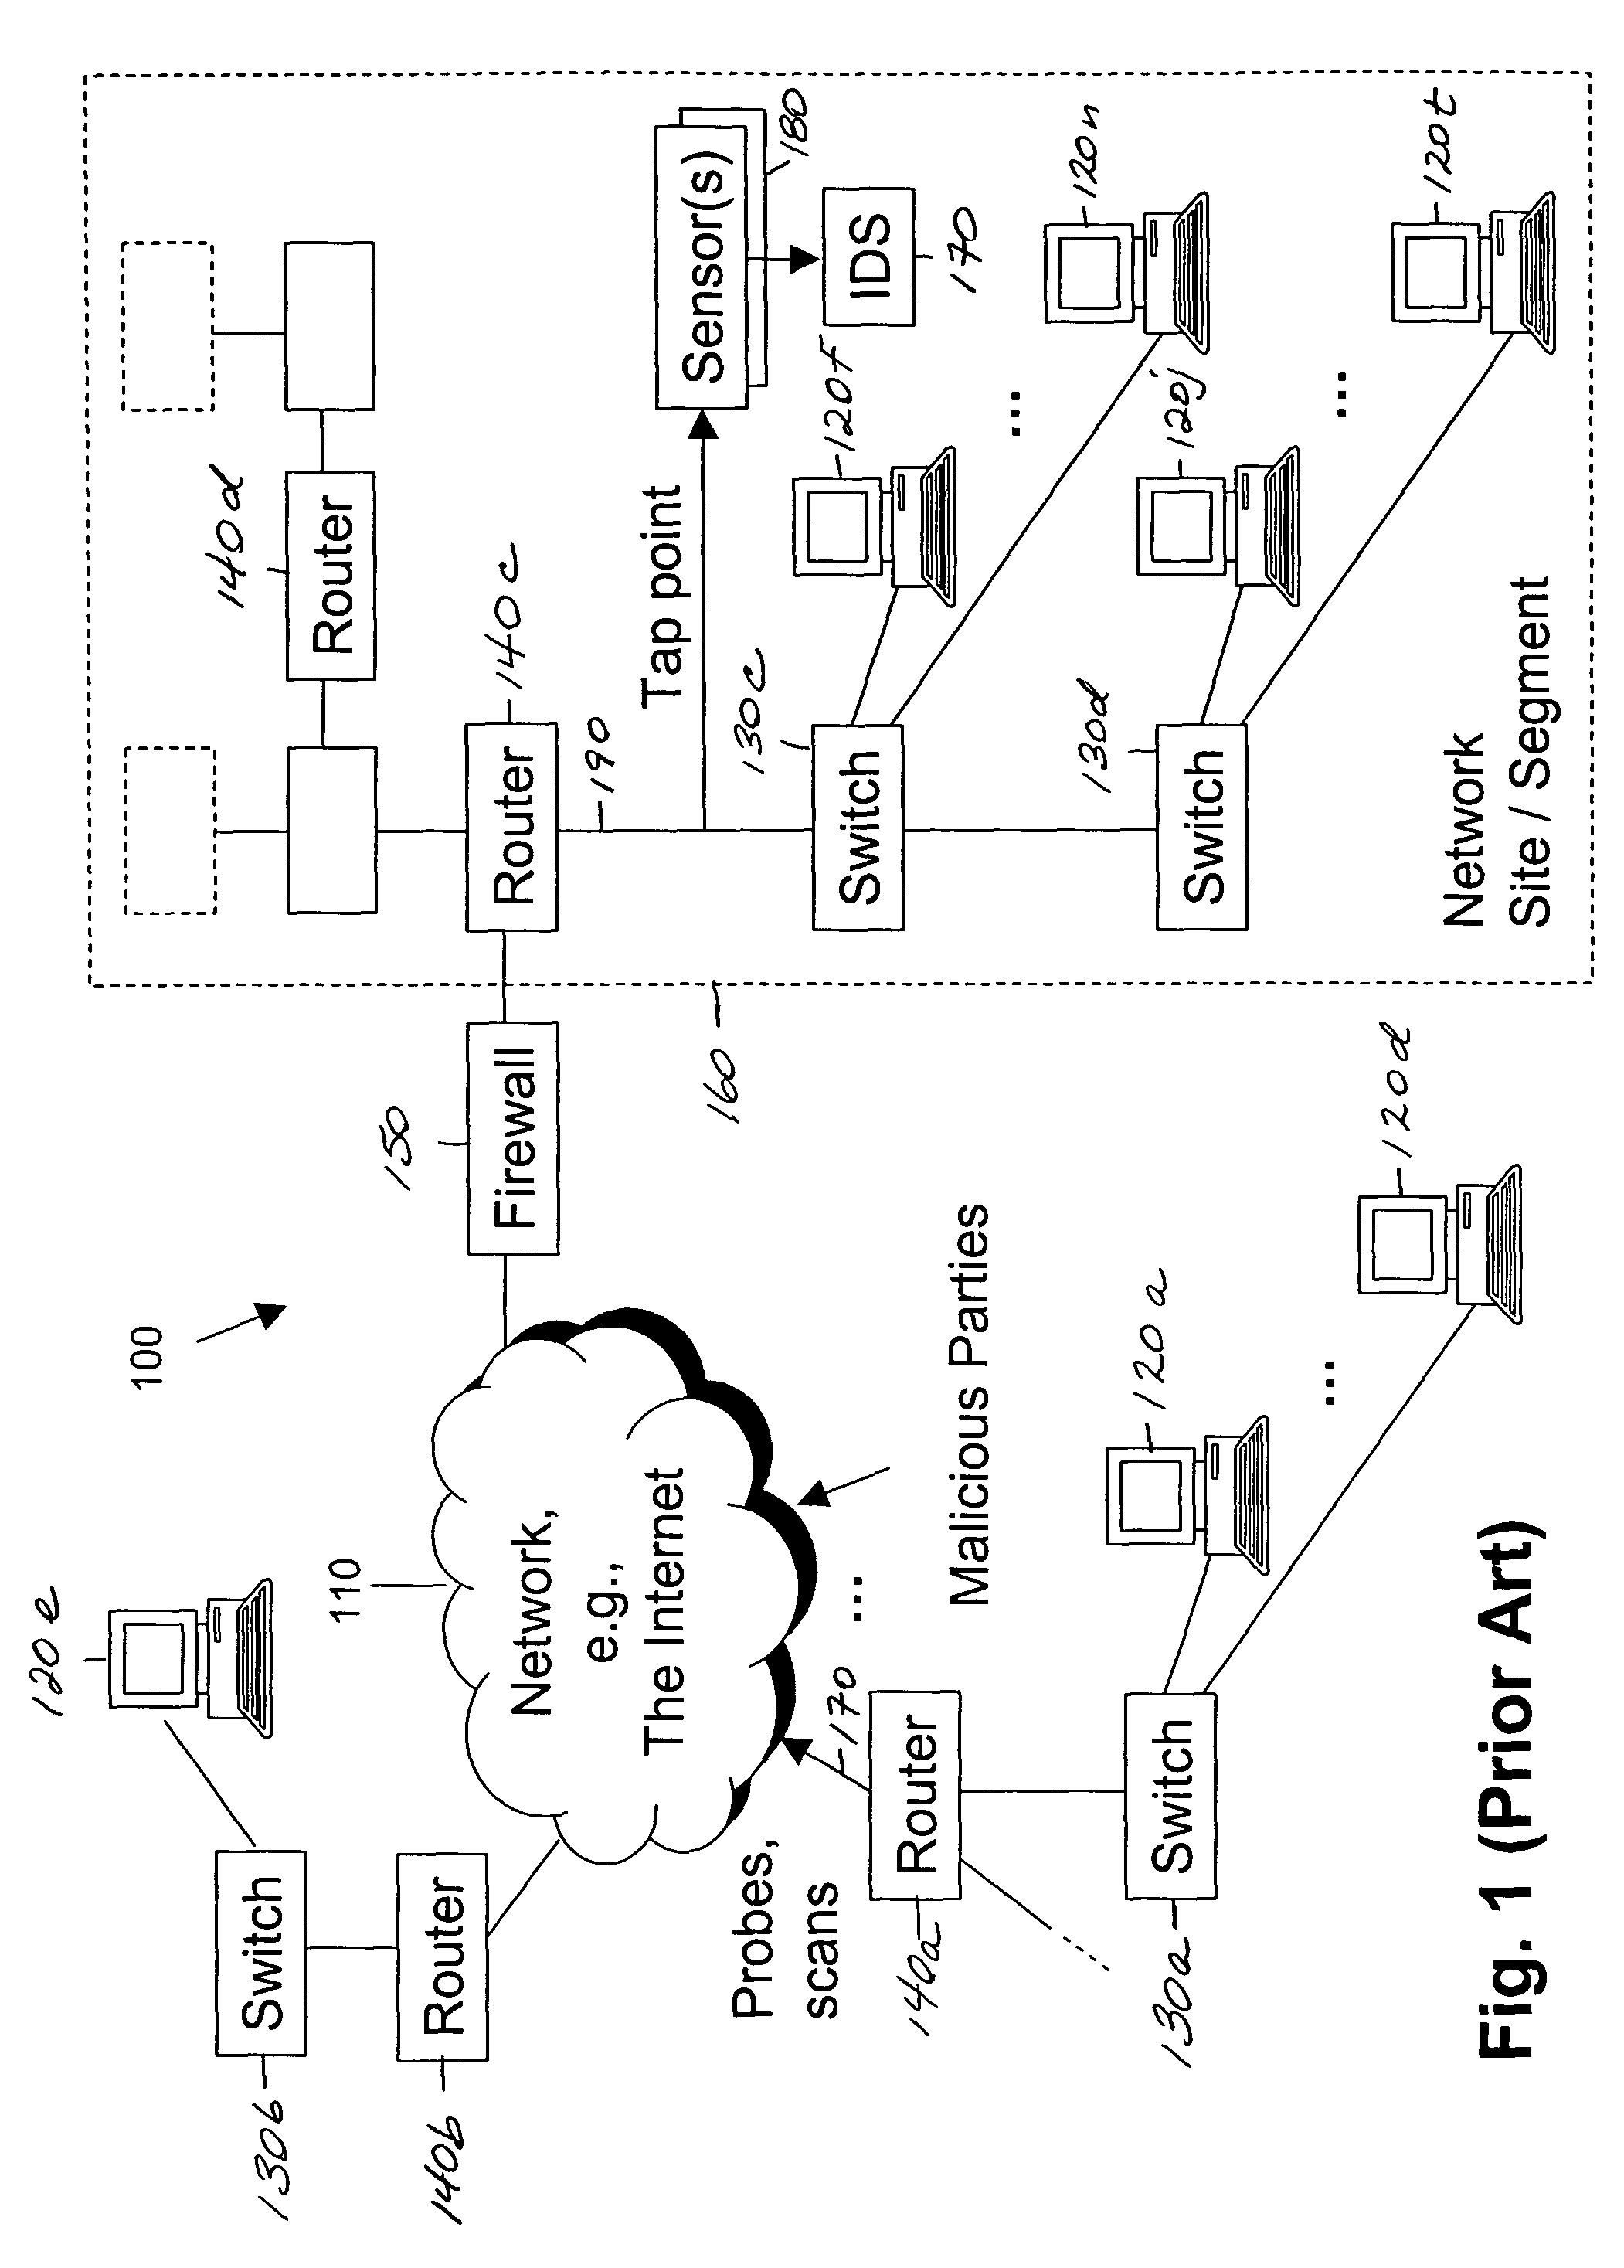 Detecting probes and scans over high-bandwidth, long-term, incomplete network traffic information using limited memory